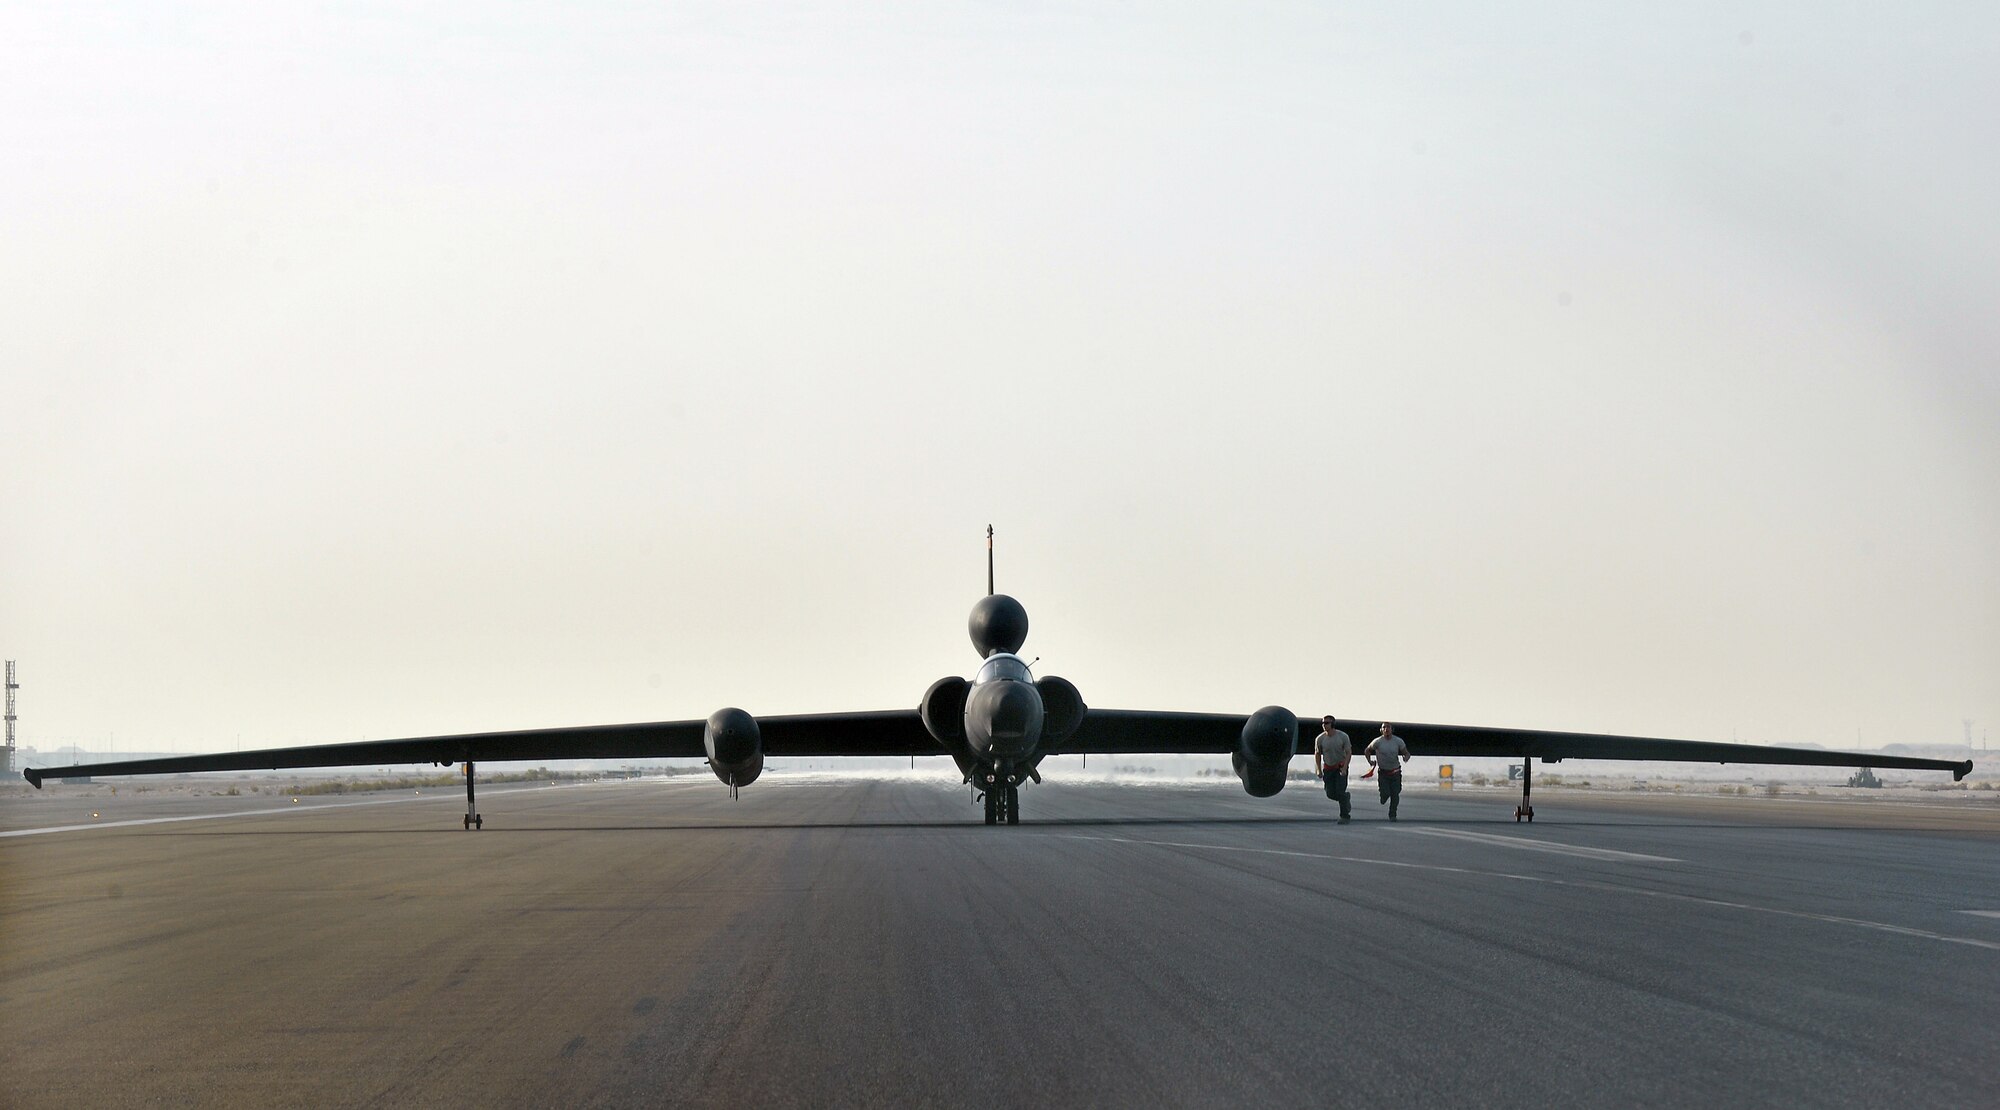 The U-2 Dragon Lady prepares for take-off at an undisclosed location in Southwest Asia Aug. 7, 2015. The U-2 has been conducting intelligence, surveillance and reconnaissance missions in the Air Force for 60 years. Here, its missions support Operation INHERENT RESOLVE, a multi-national effort with a shared objective to degrade and ultimately eliminate the Islamic State in Iraq and the Levant, otherwise known as ISIL or Da’ish. (U.S. Air Force photo/Tech. Sgt. Jeff Andrejcik)